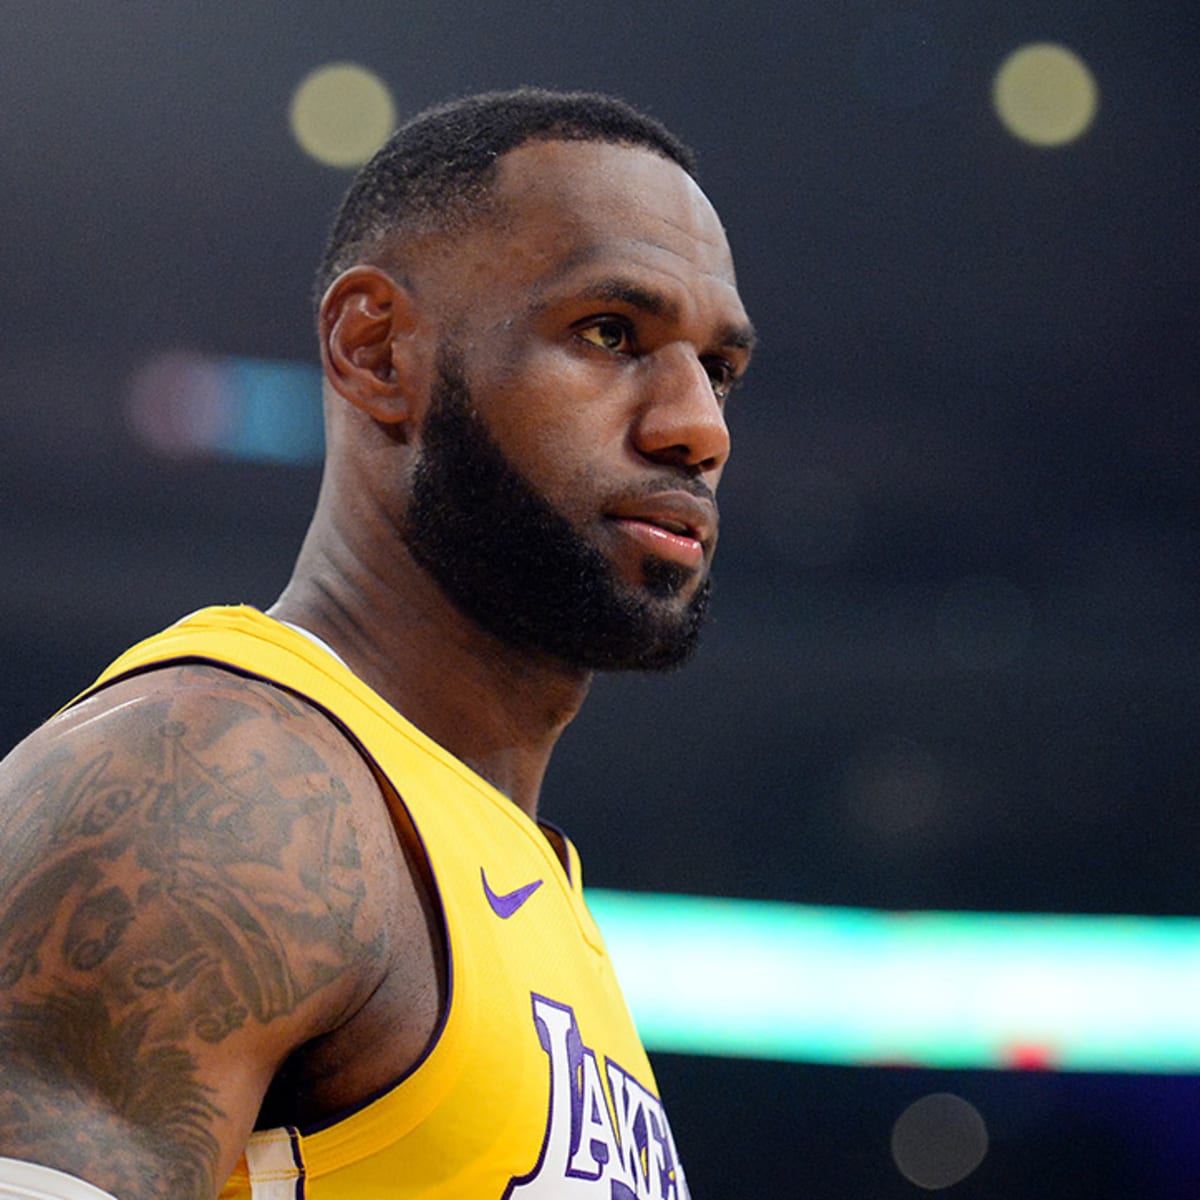 LeBron James injury update: Lakers Star will play Monday vs. Trail